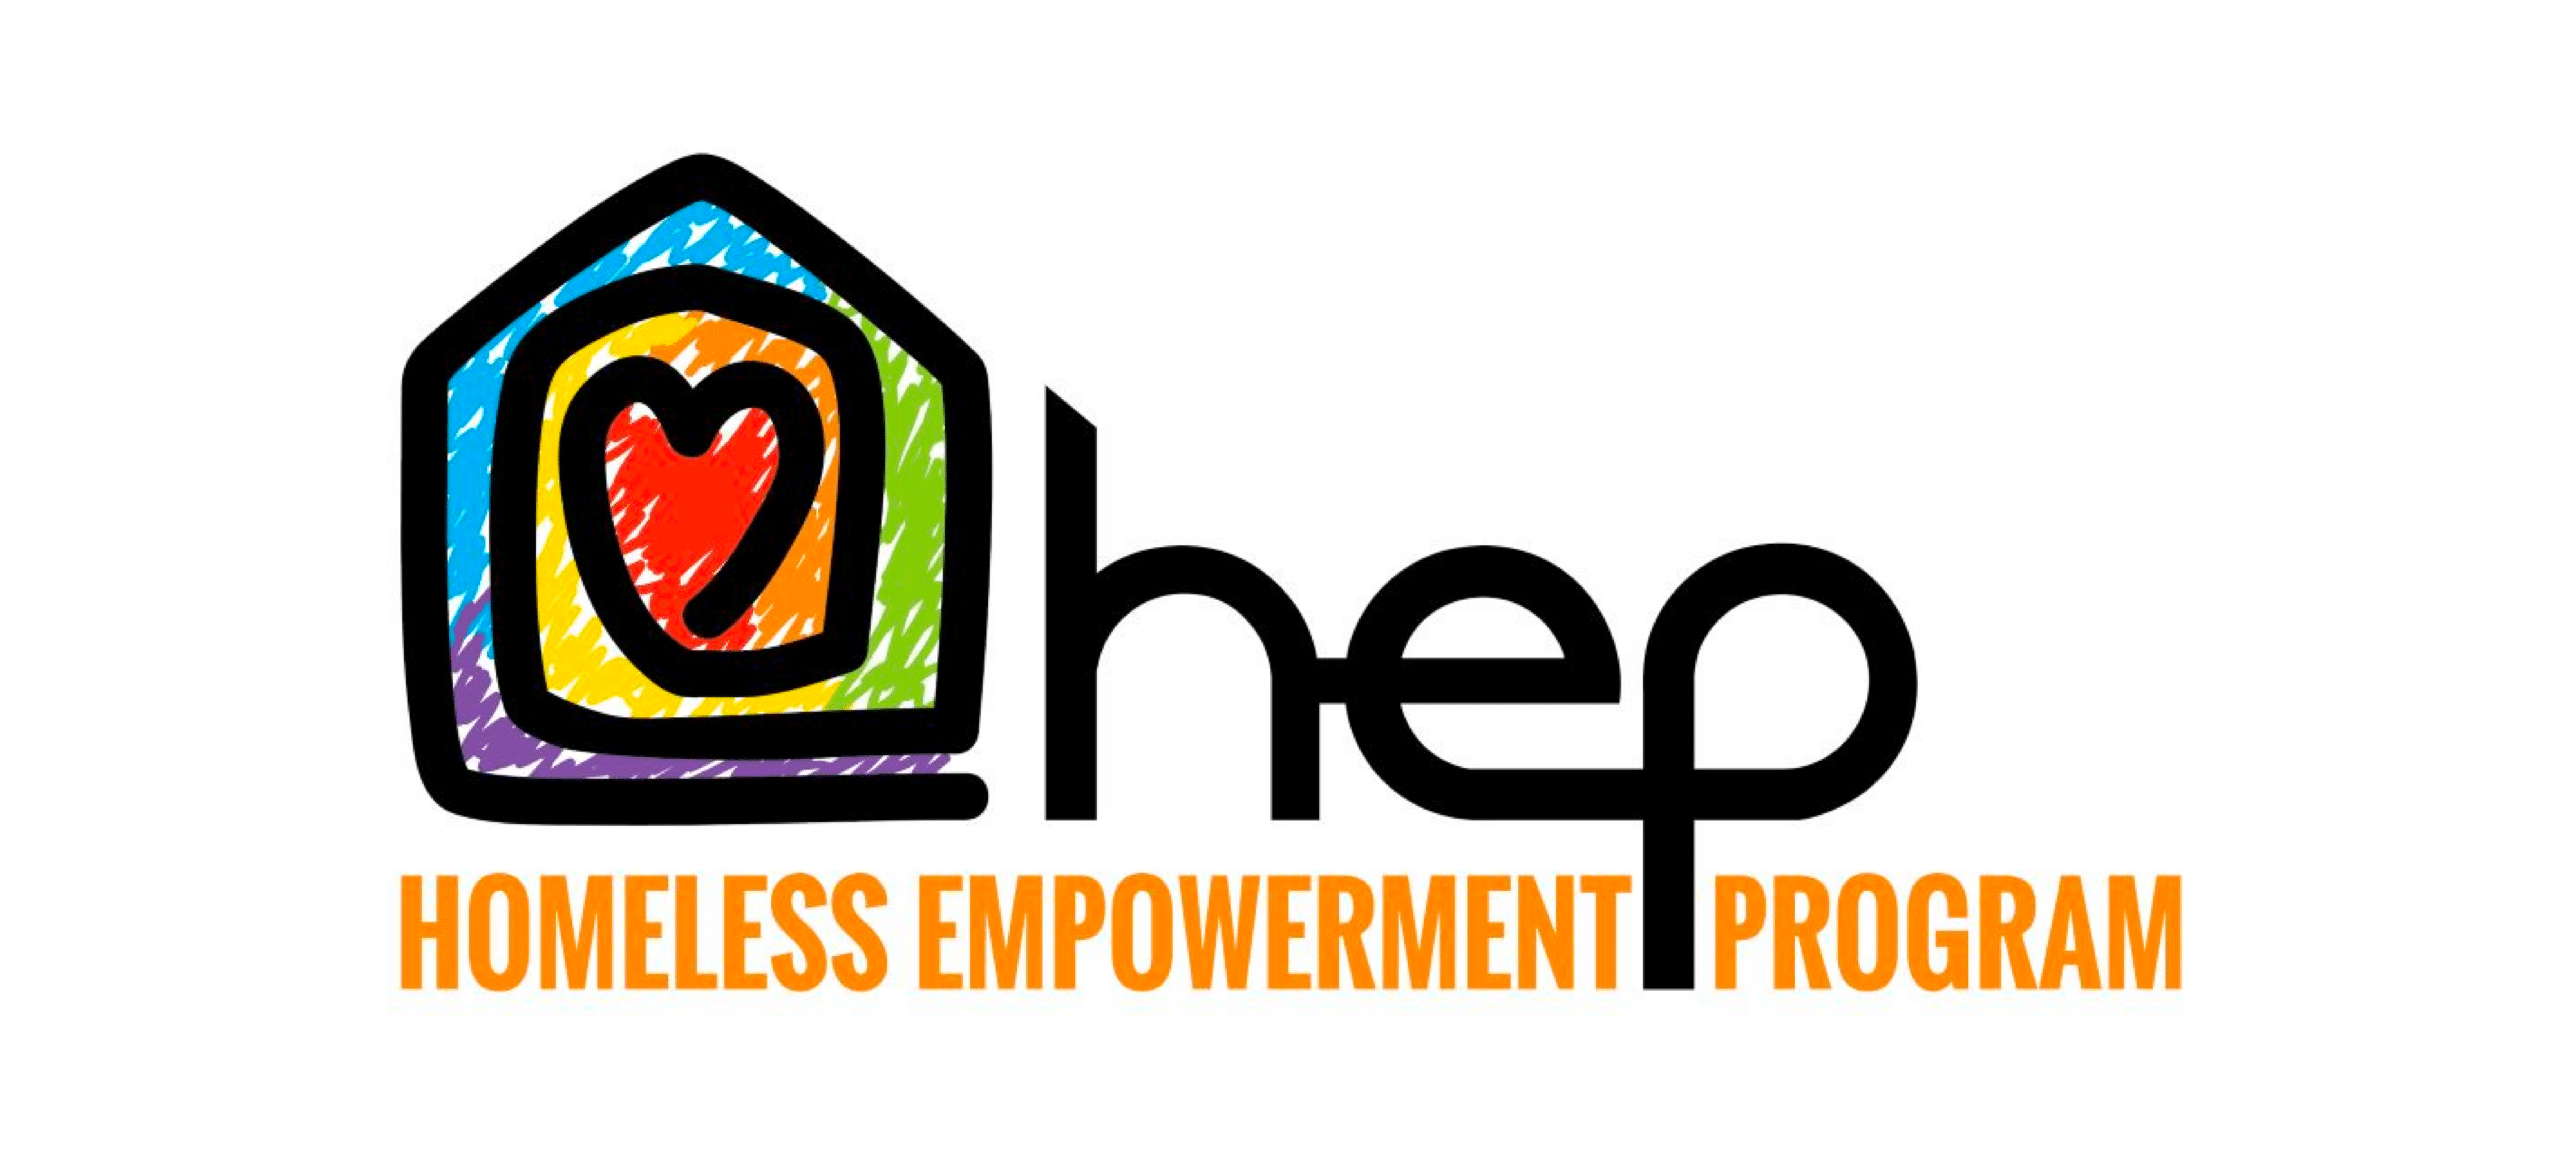 Logo of the Community Support program for homeless empowerment (hep), featuring a colorful house outline with a heart and the acronym "hep".